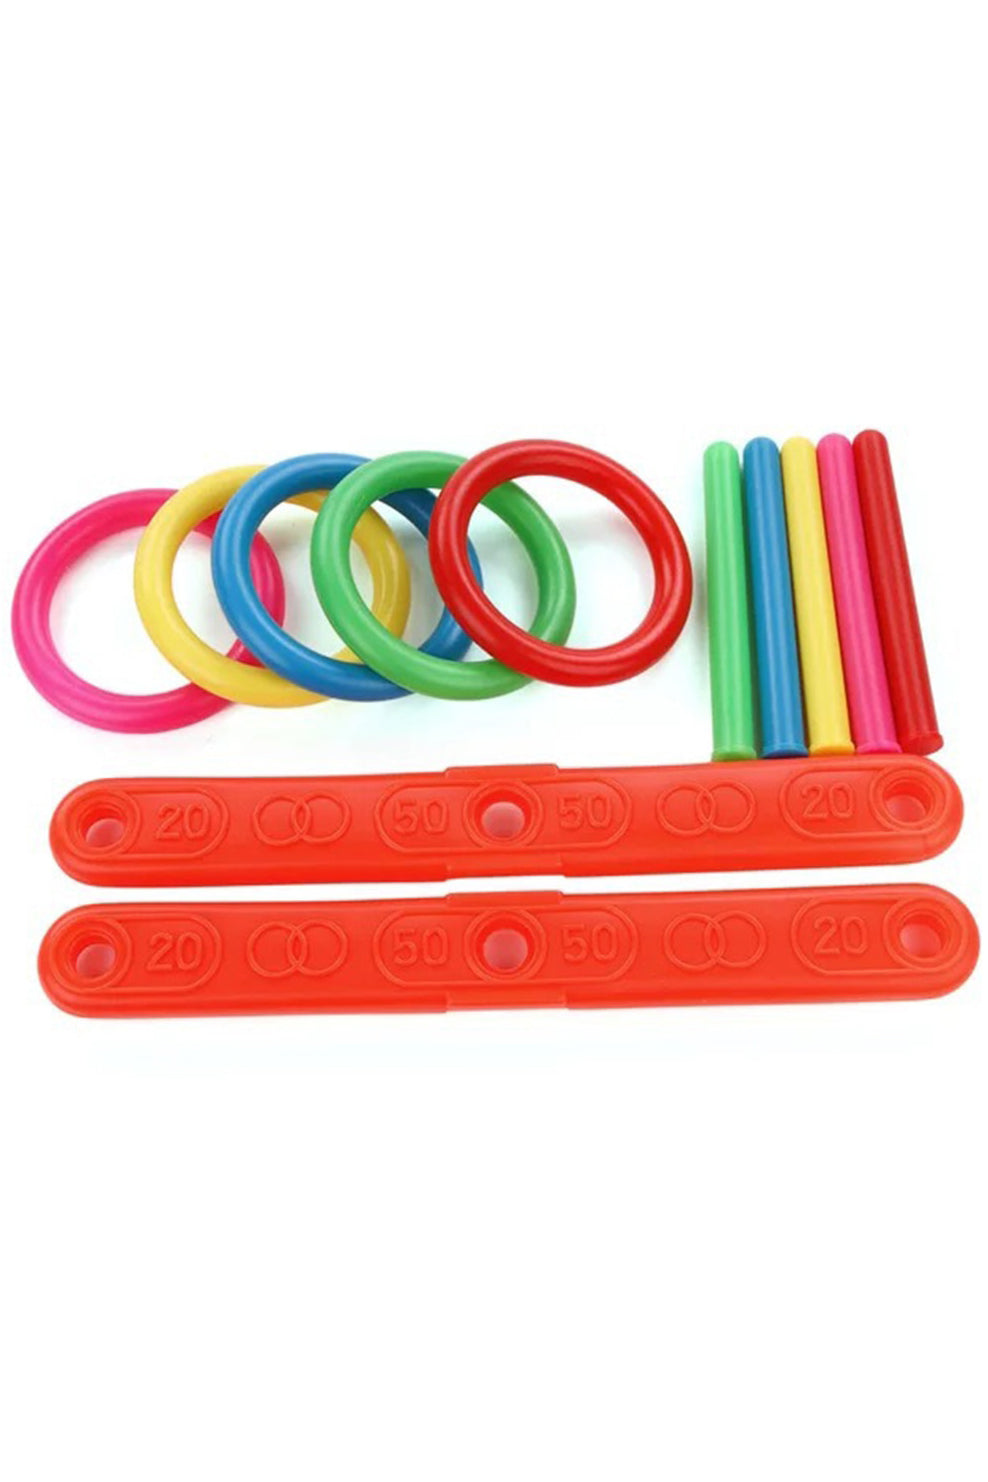 Ring Toss, Rings and Pegs Game, Kids Sports, Children Ages 3+ by